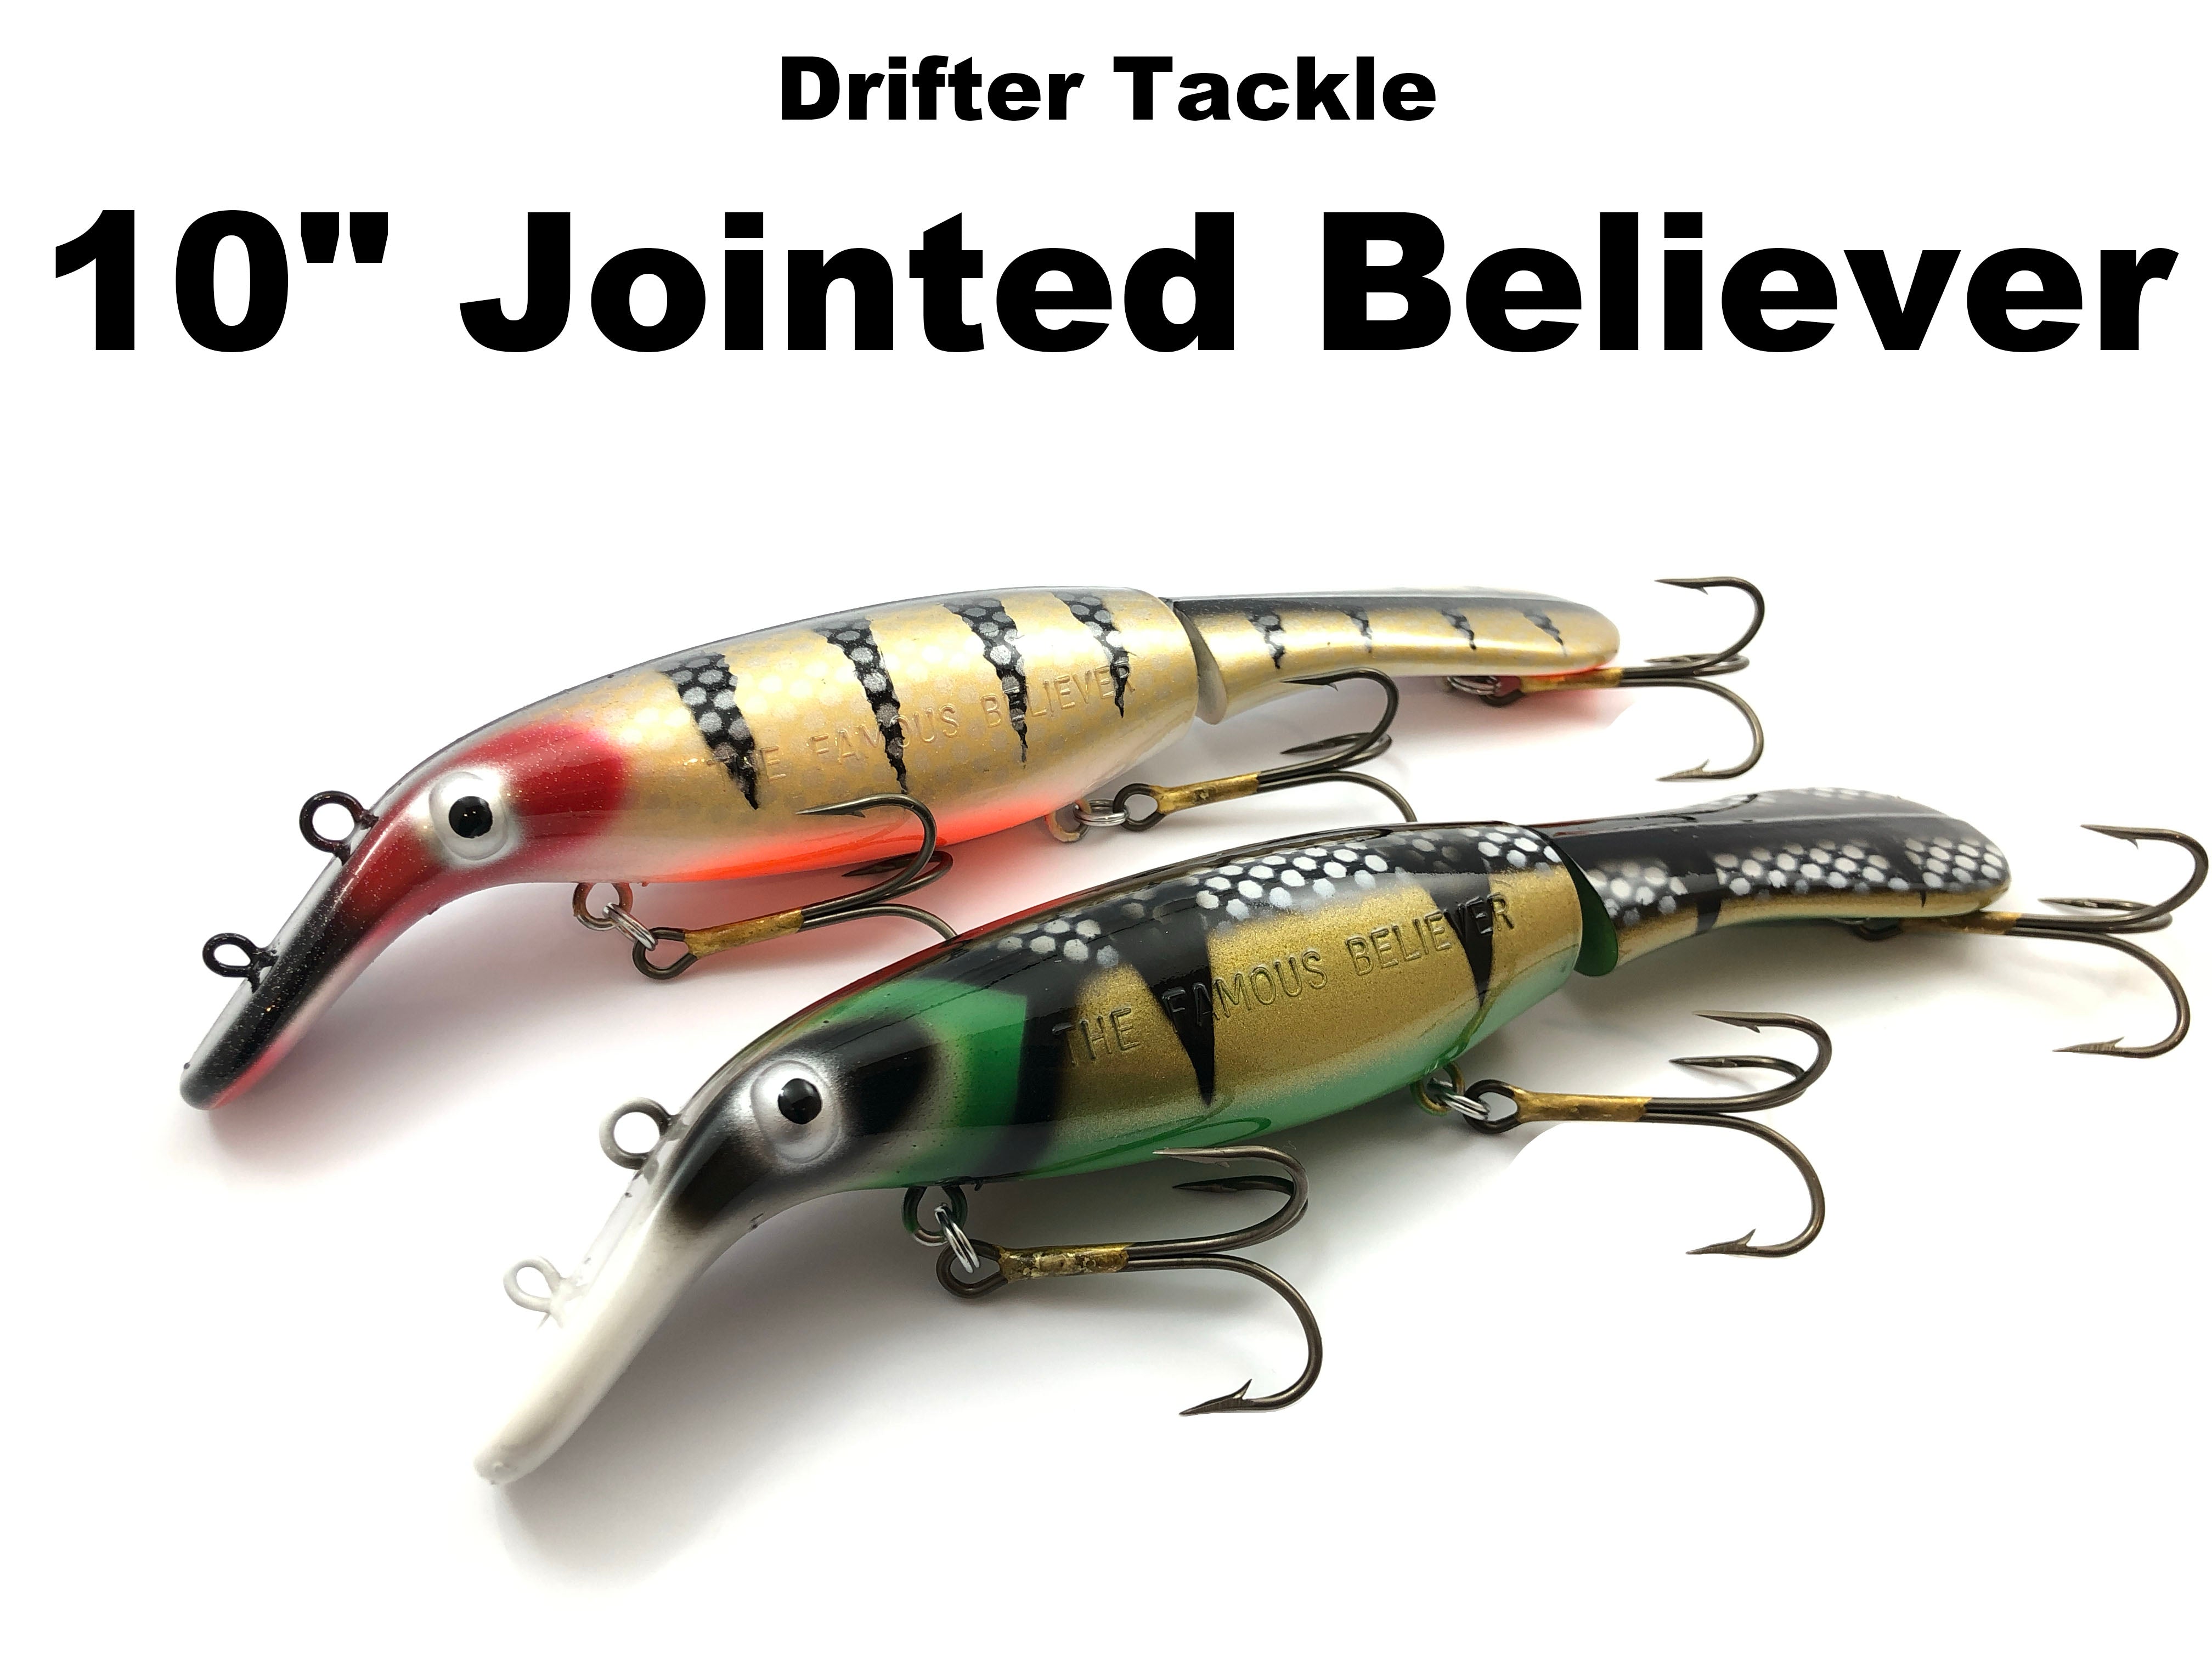 Drifter Tackle 10 Jointed Believer – Team Rhino Outdoors LLC